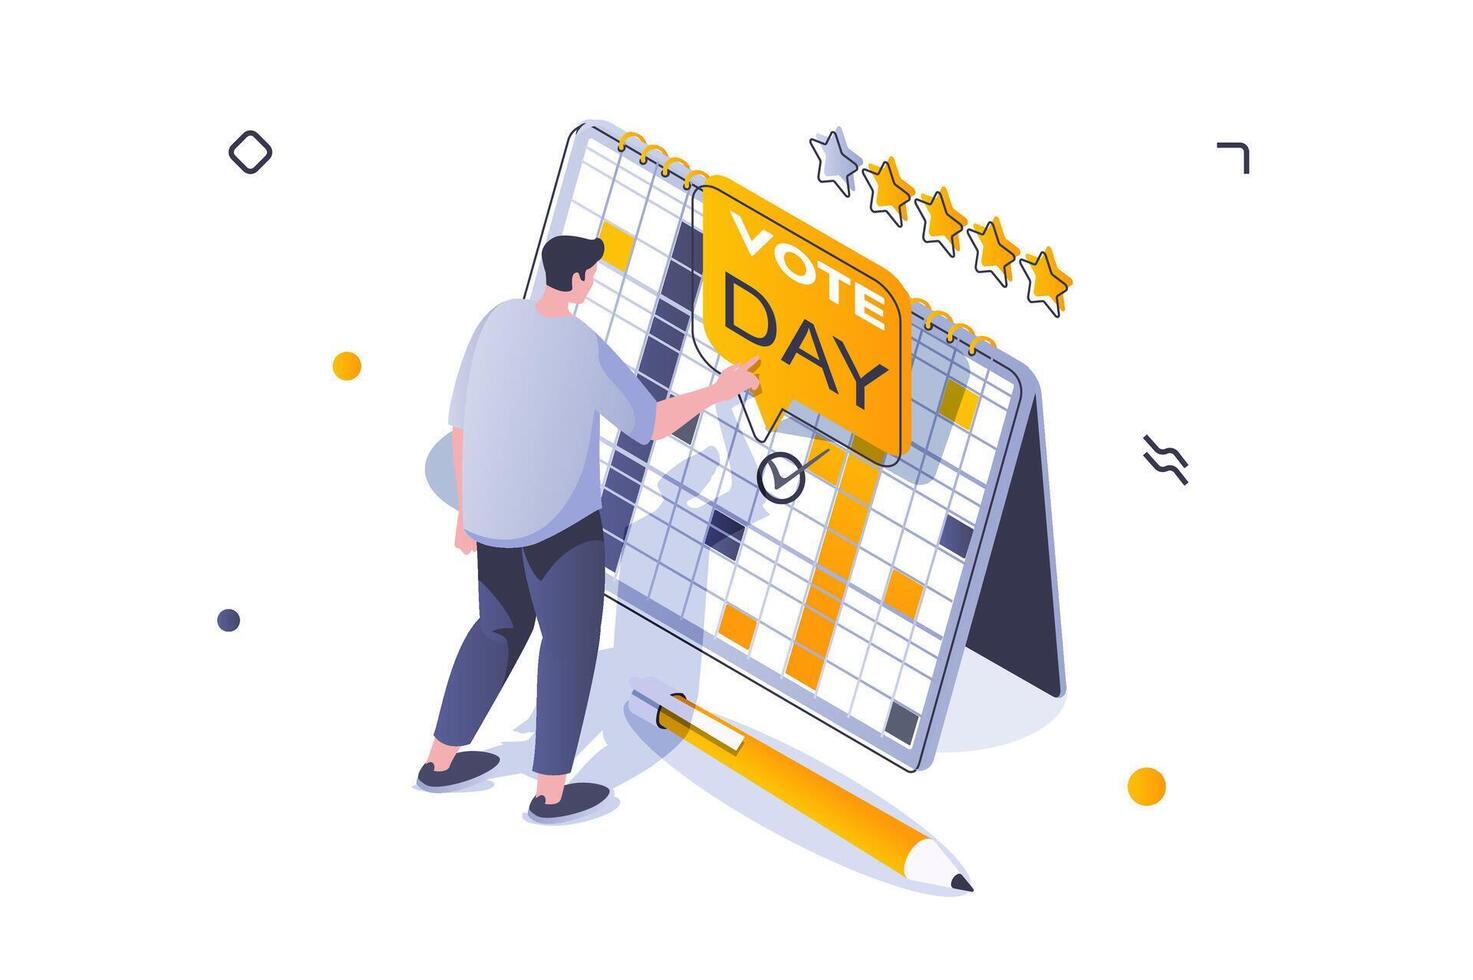 Election and voting concept in 3d isometric design. Man voter marks election day on calendar and planning to come to polling station. Vector illustration with isometric people scene for web graphic